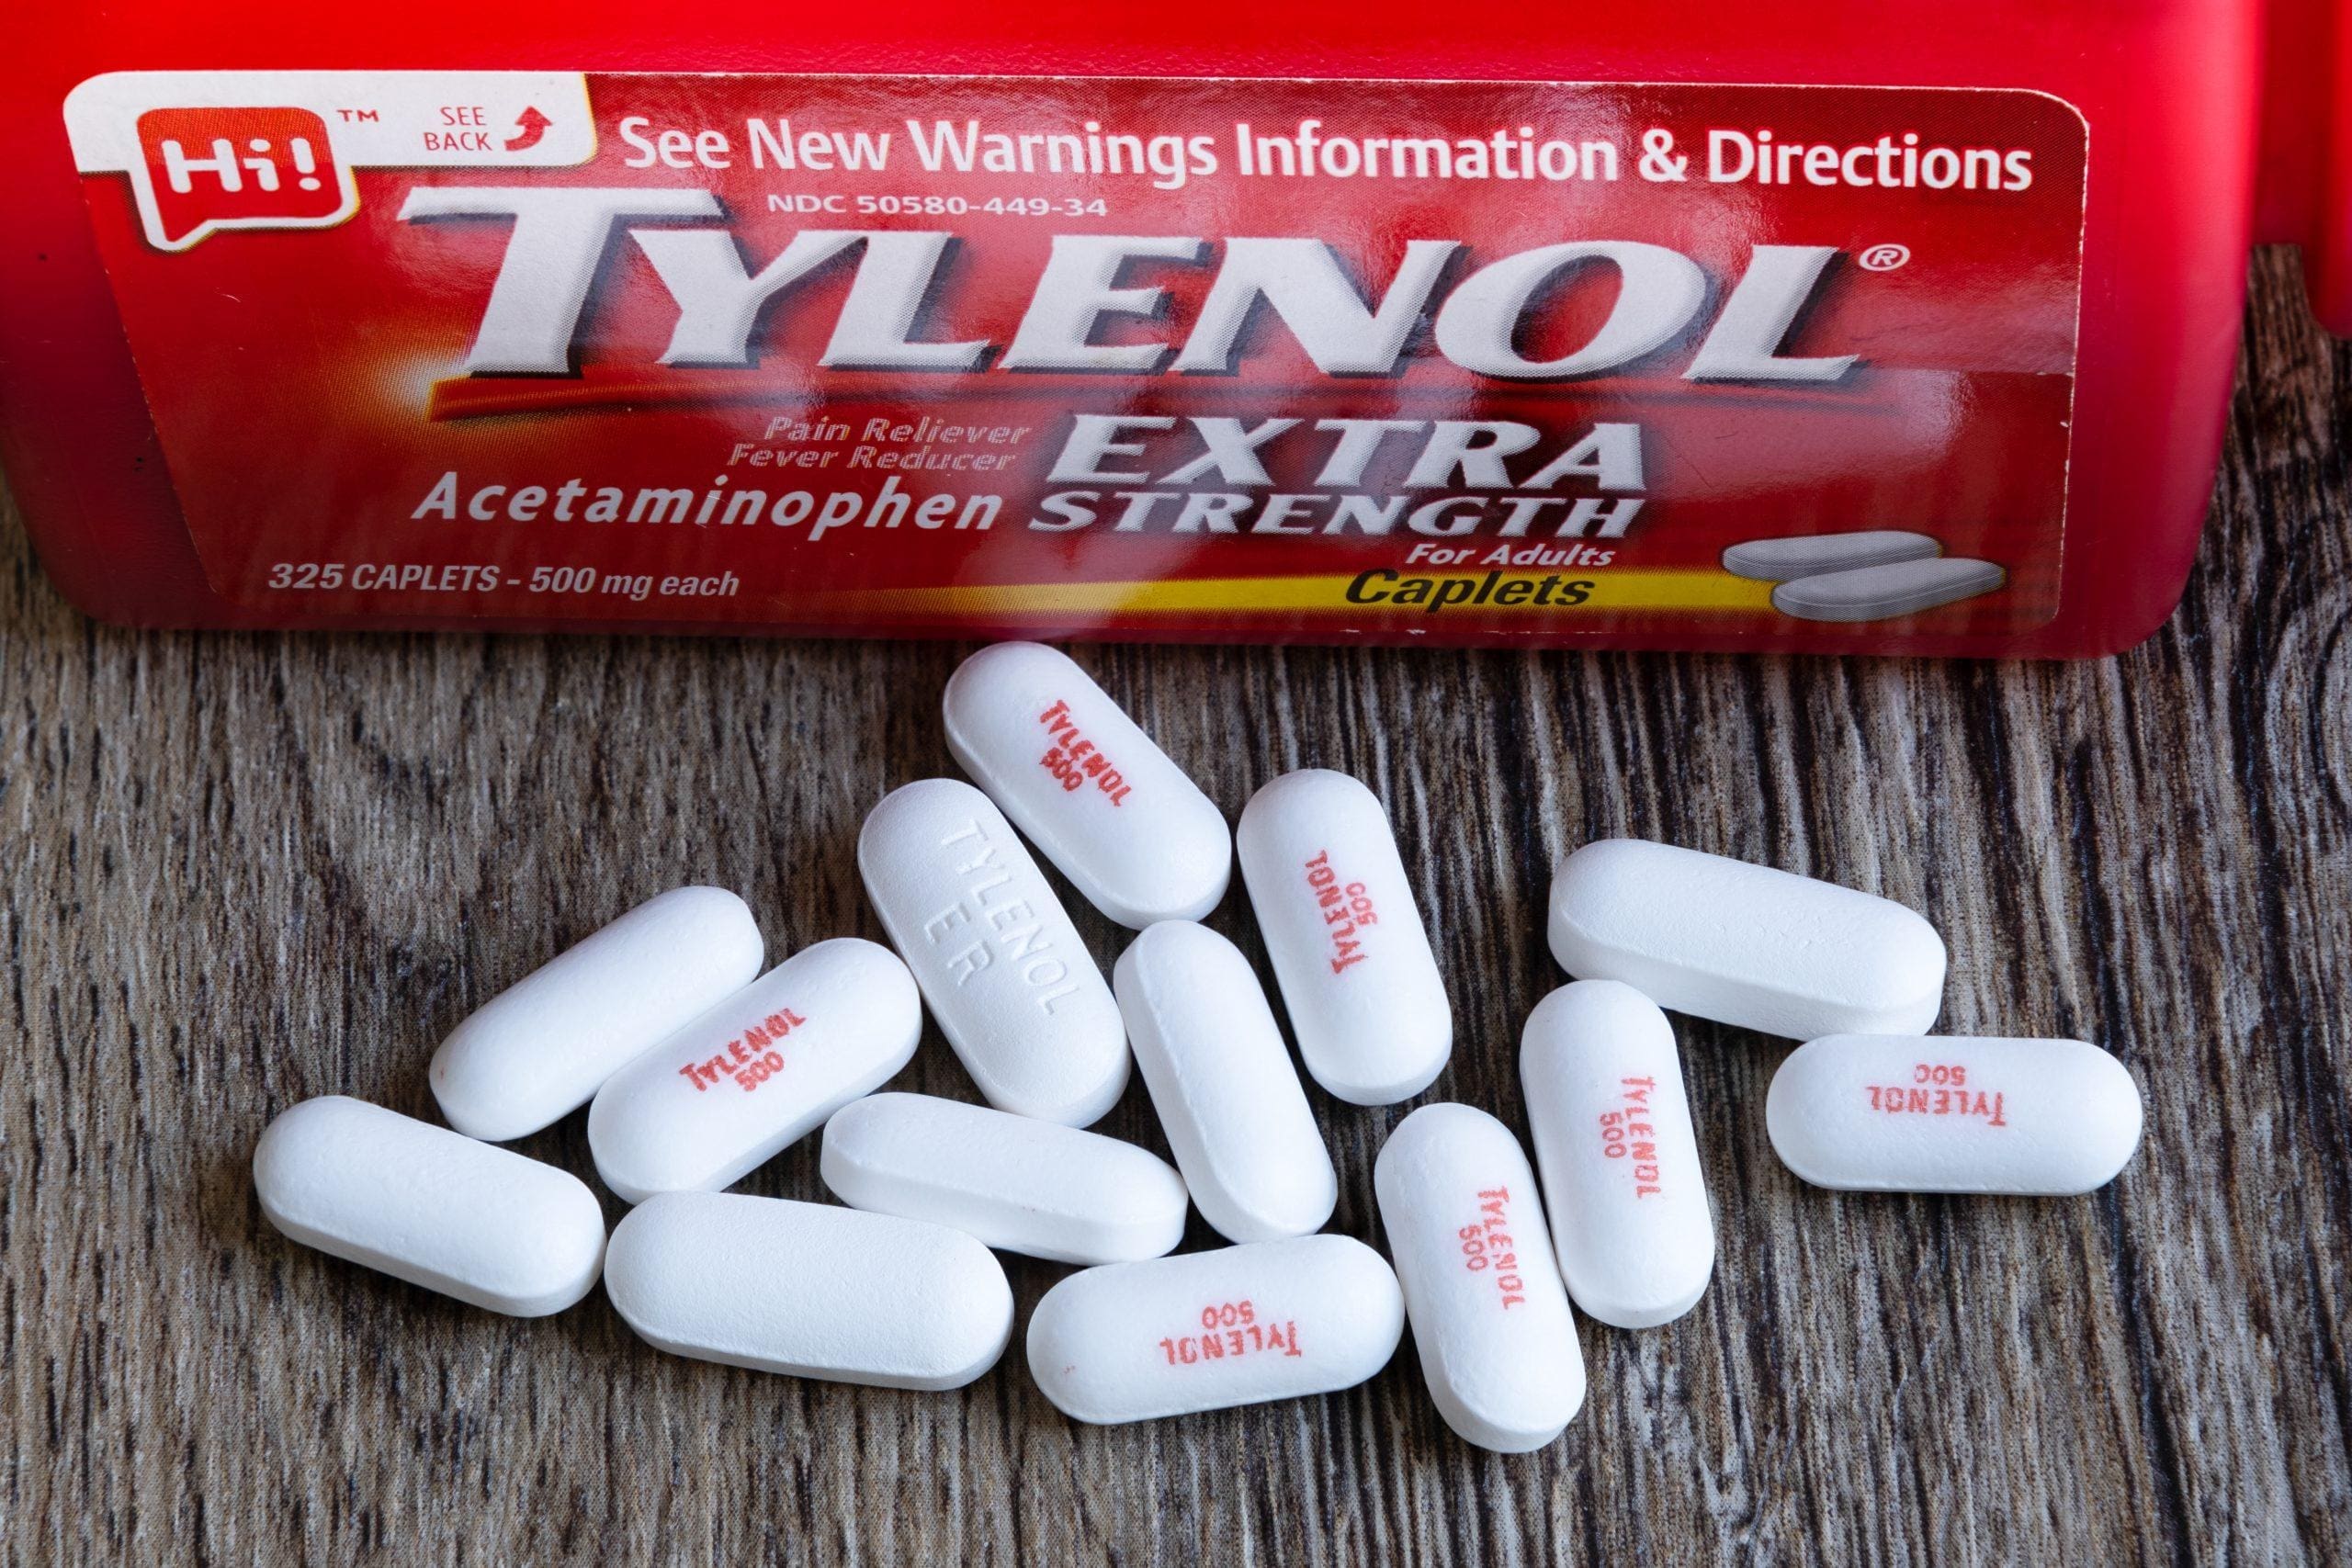 Tylenol® Use During Pregnancy Linked to Autism